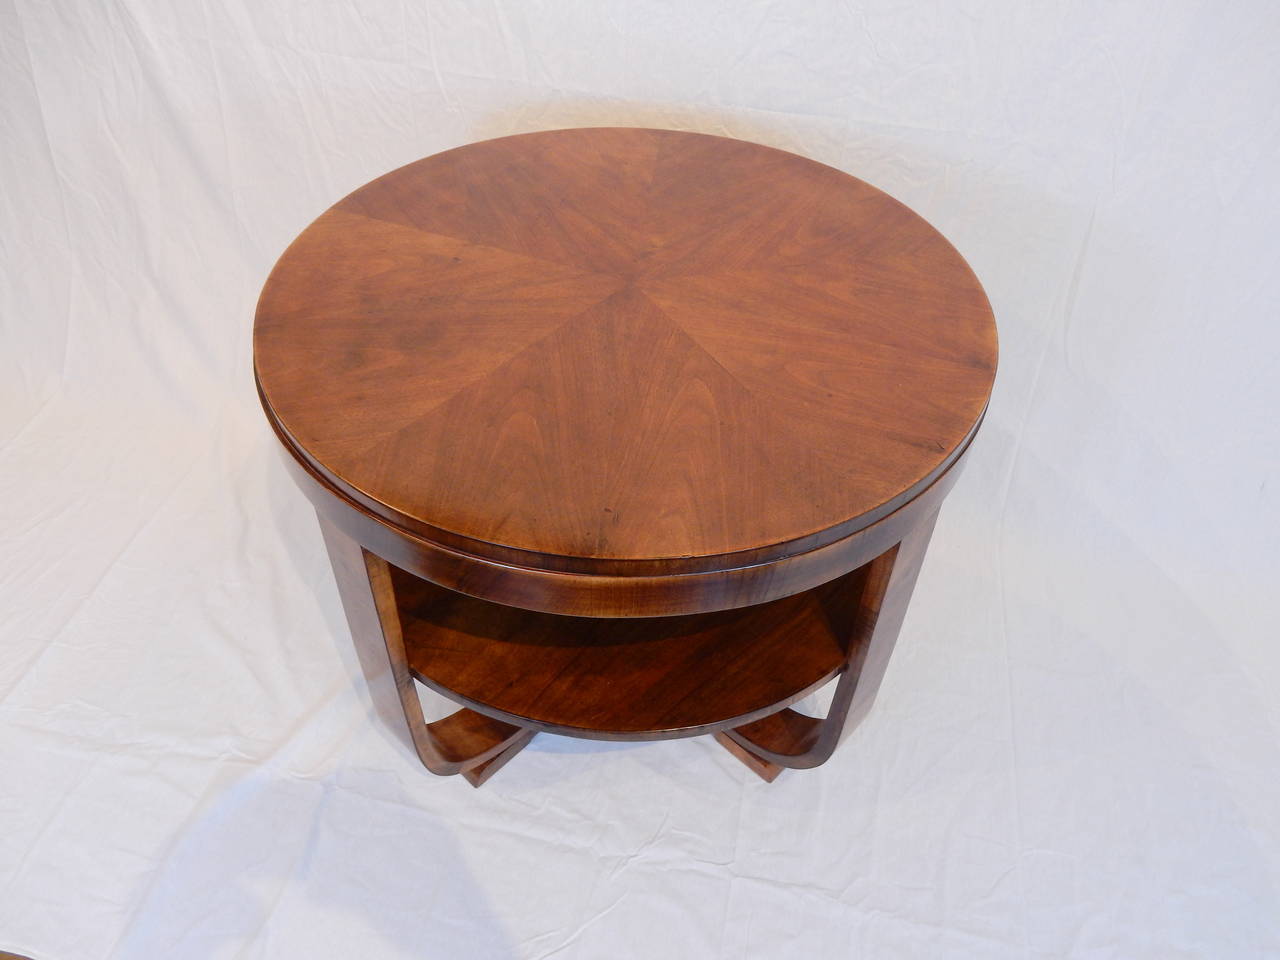 Elegant round Art Deco walnut table. Very nice patina and warm color. Carefully restored.